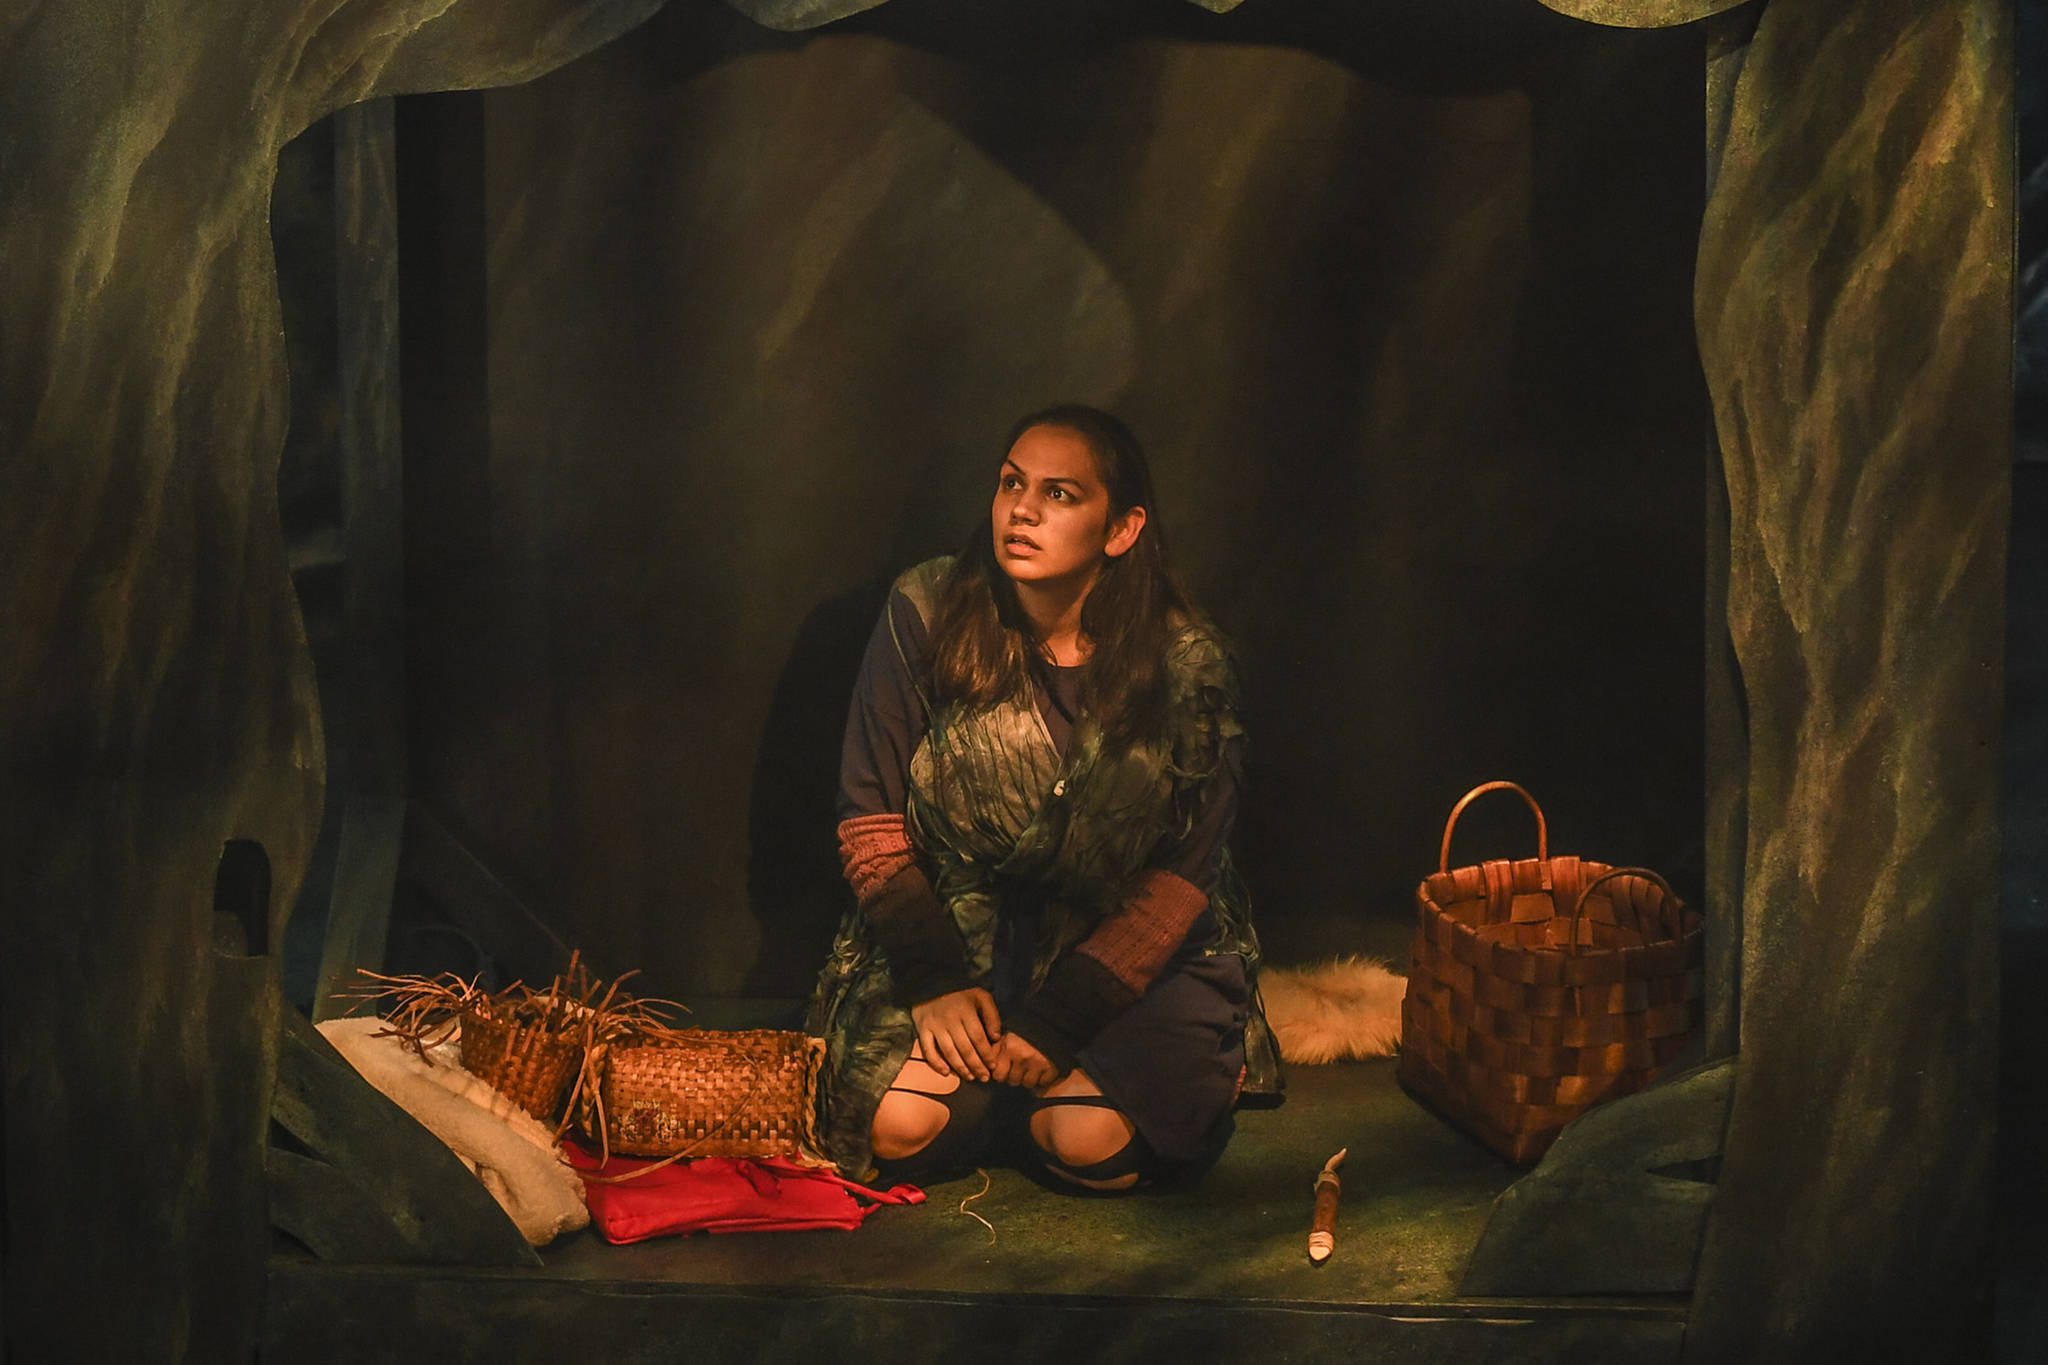 Erin Tripp, playing Aanteinatu, rehearses in Perseverance Theatre’s production of “Devilfish” written by Vera Starbard on Tuesday, Sept. 17, 2019. (Michael Penn | Juneau Empire)